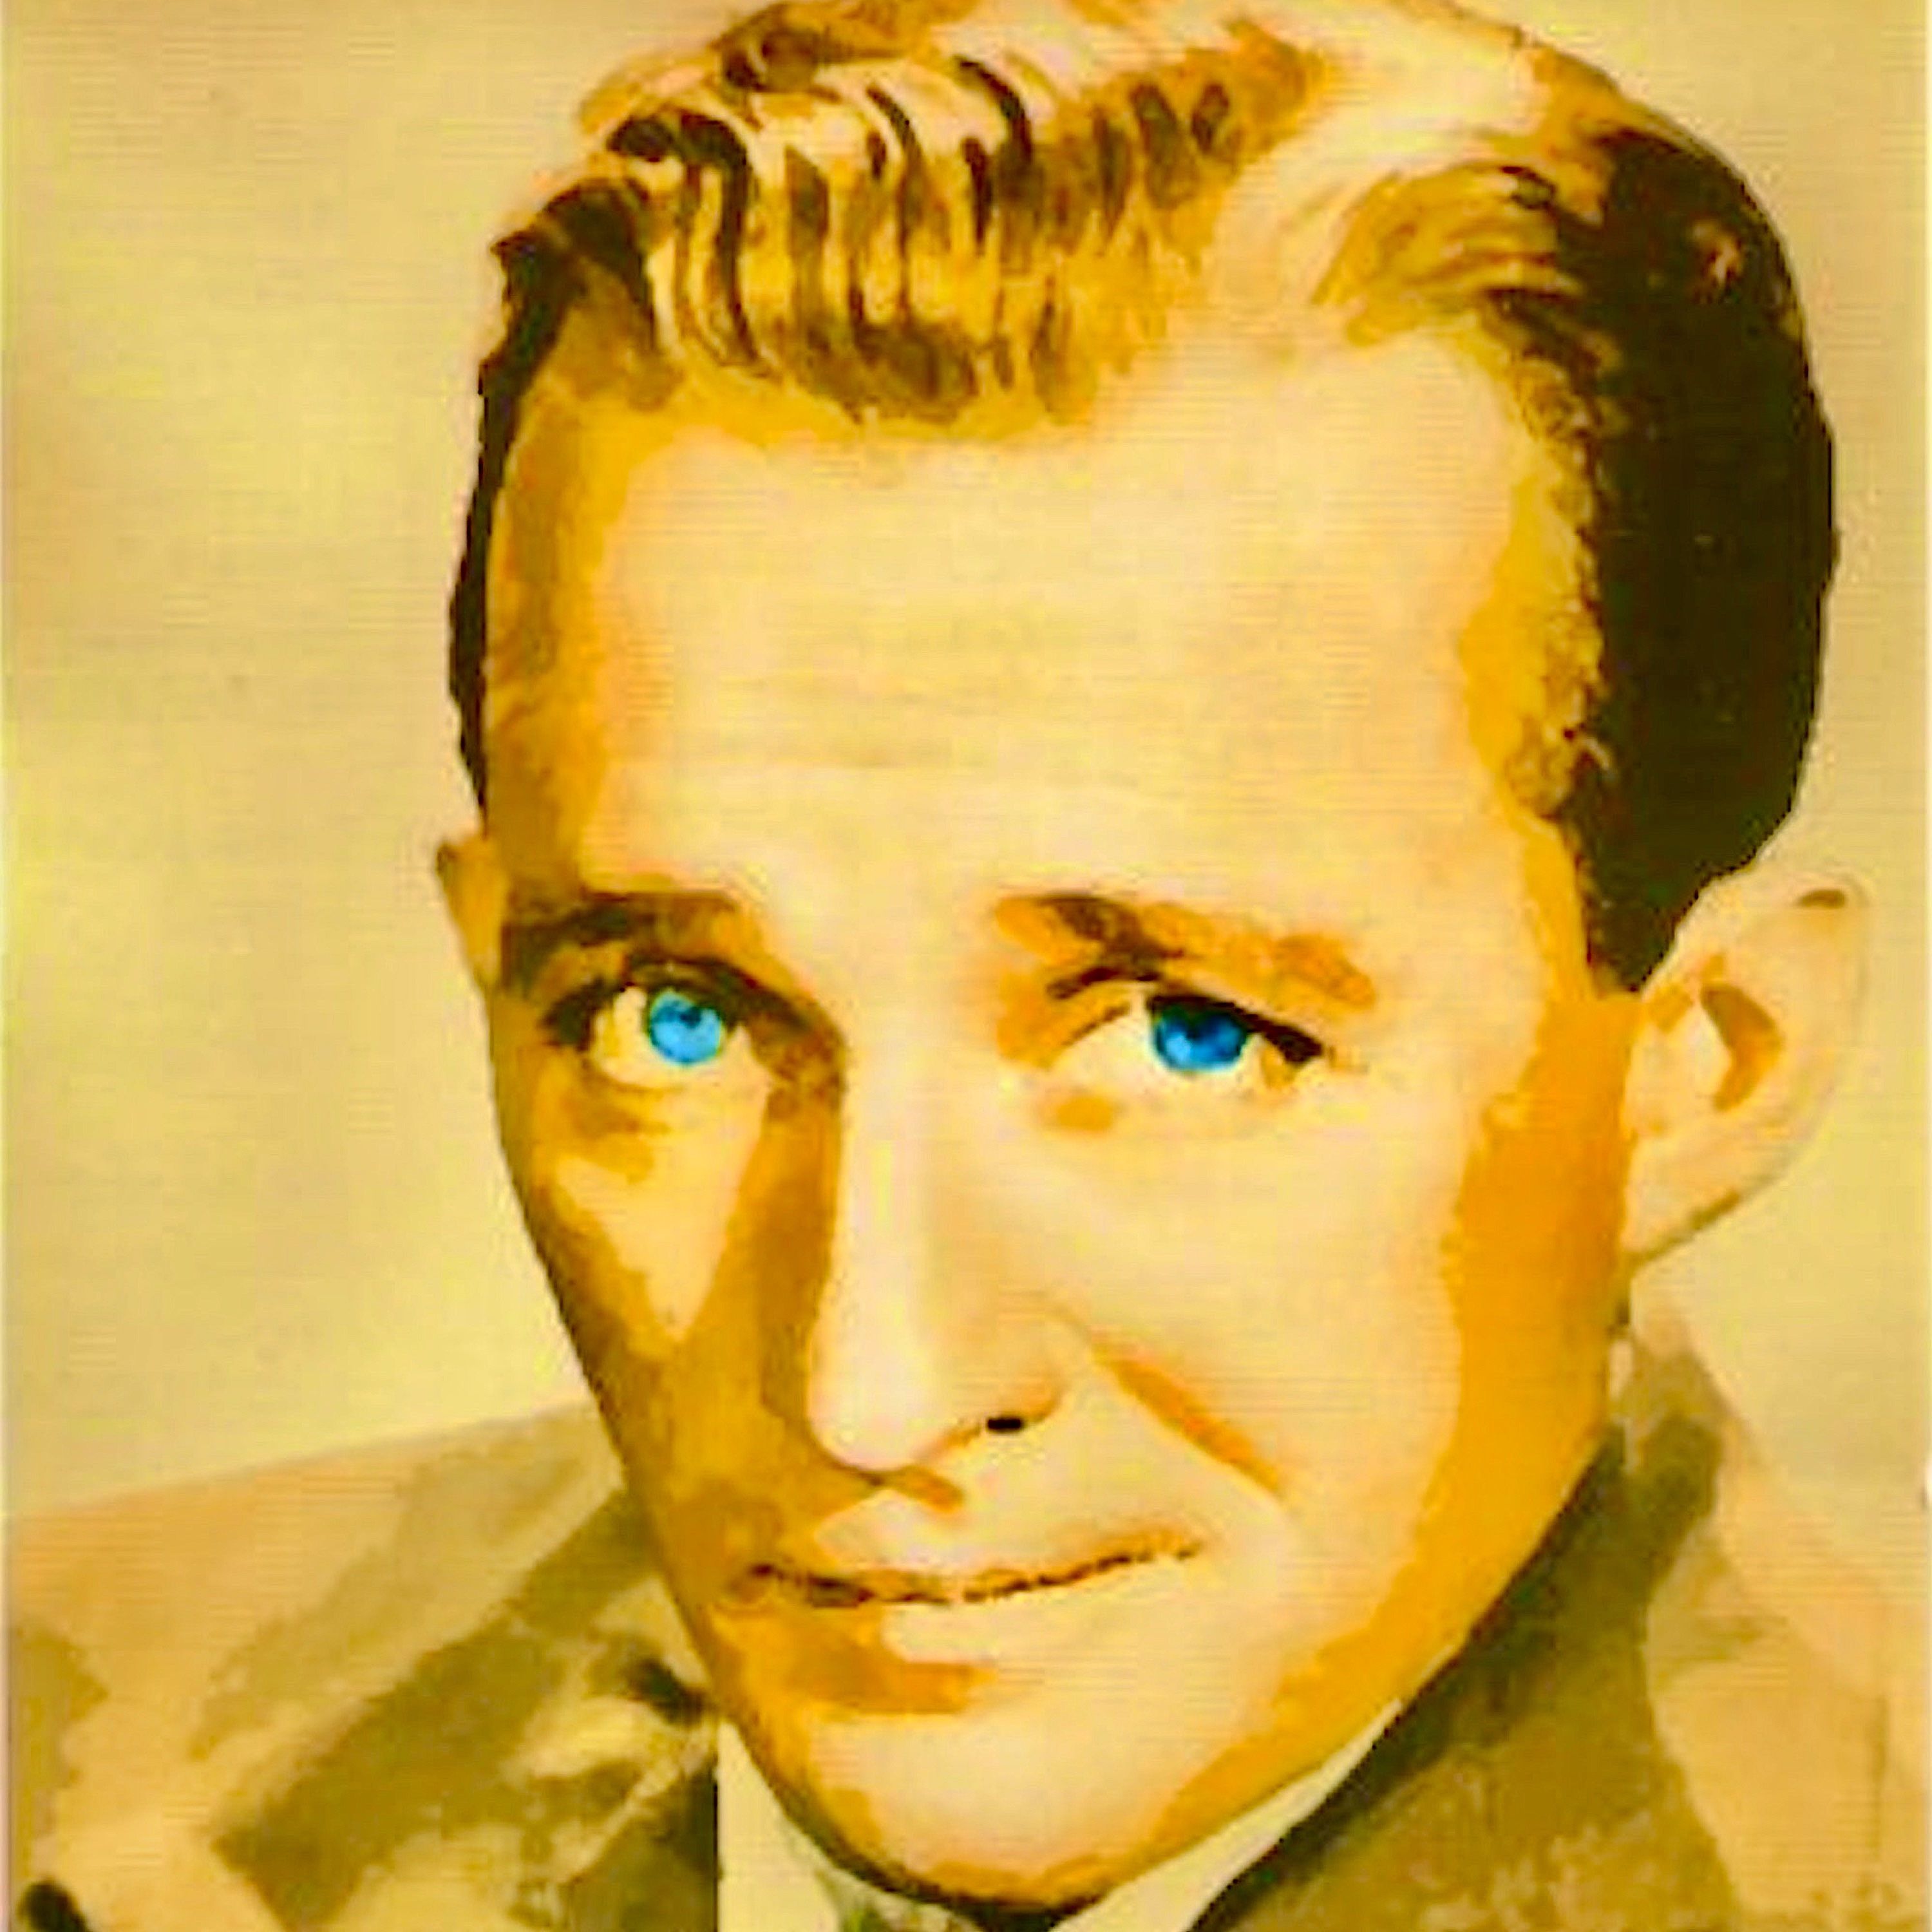 Bing Crosby - Only Number 1’s! (2019) [FLAC 24bit/96kHz]